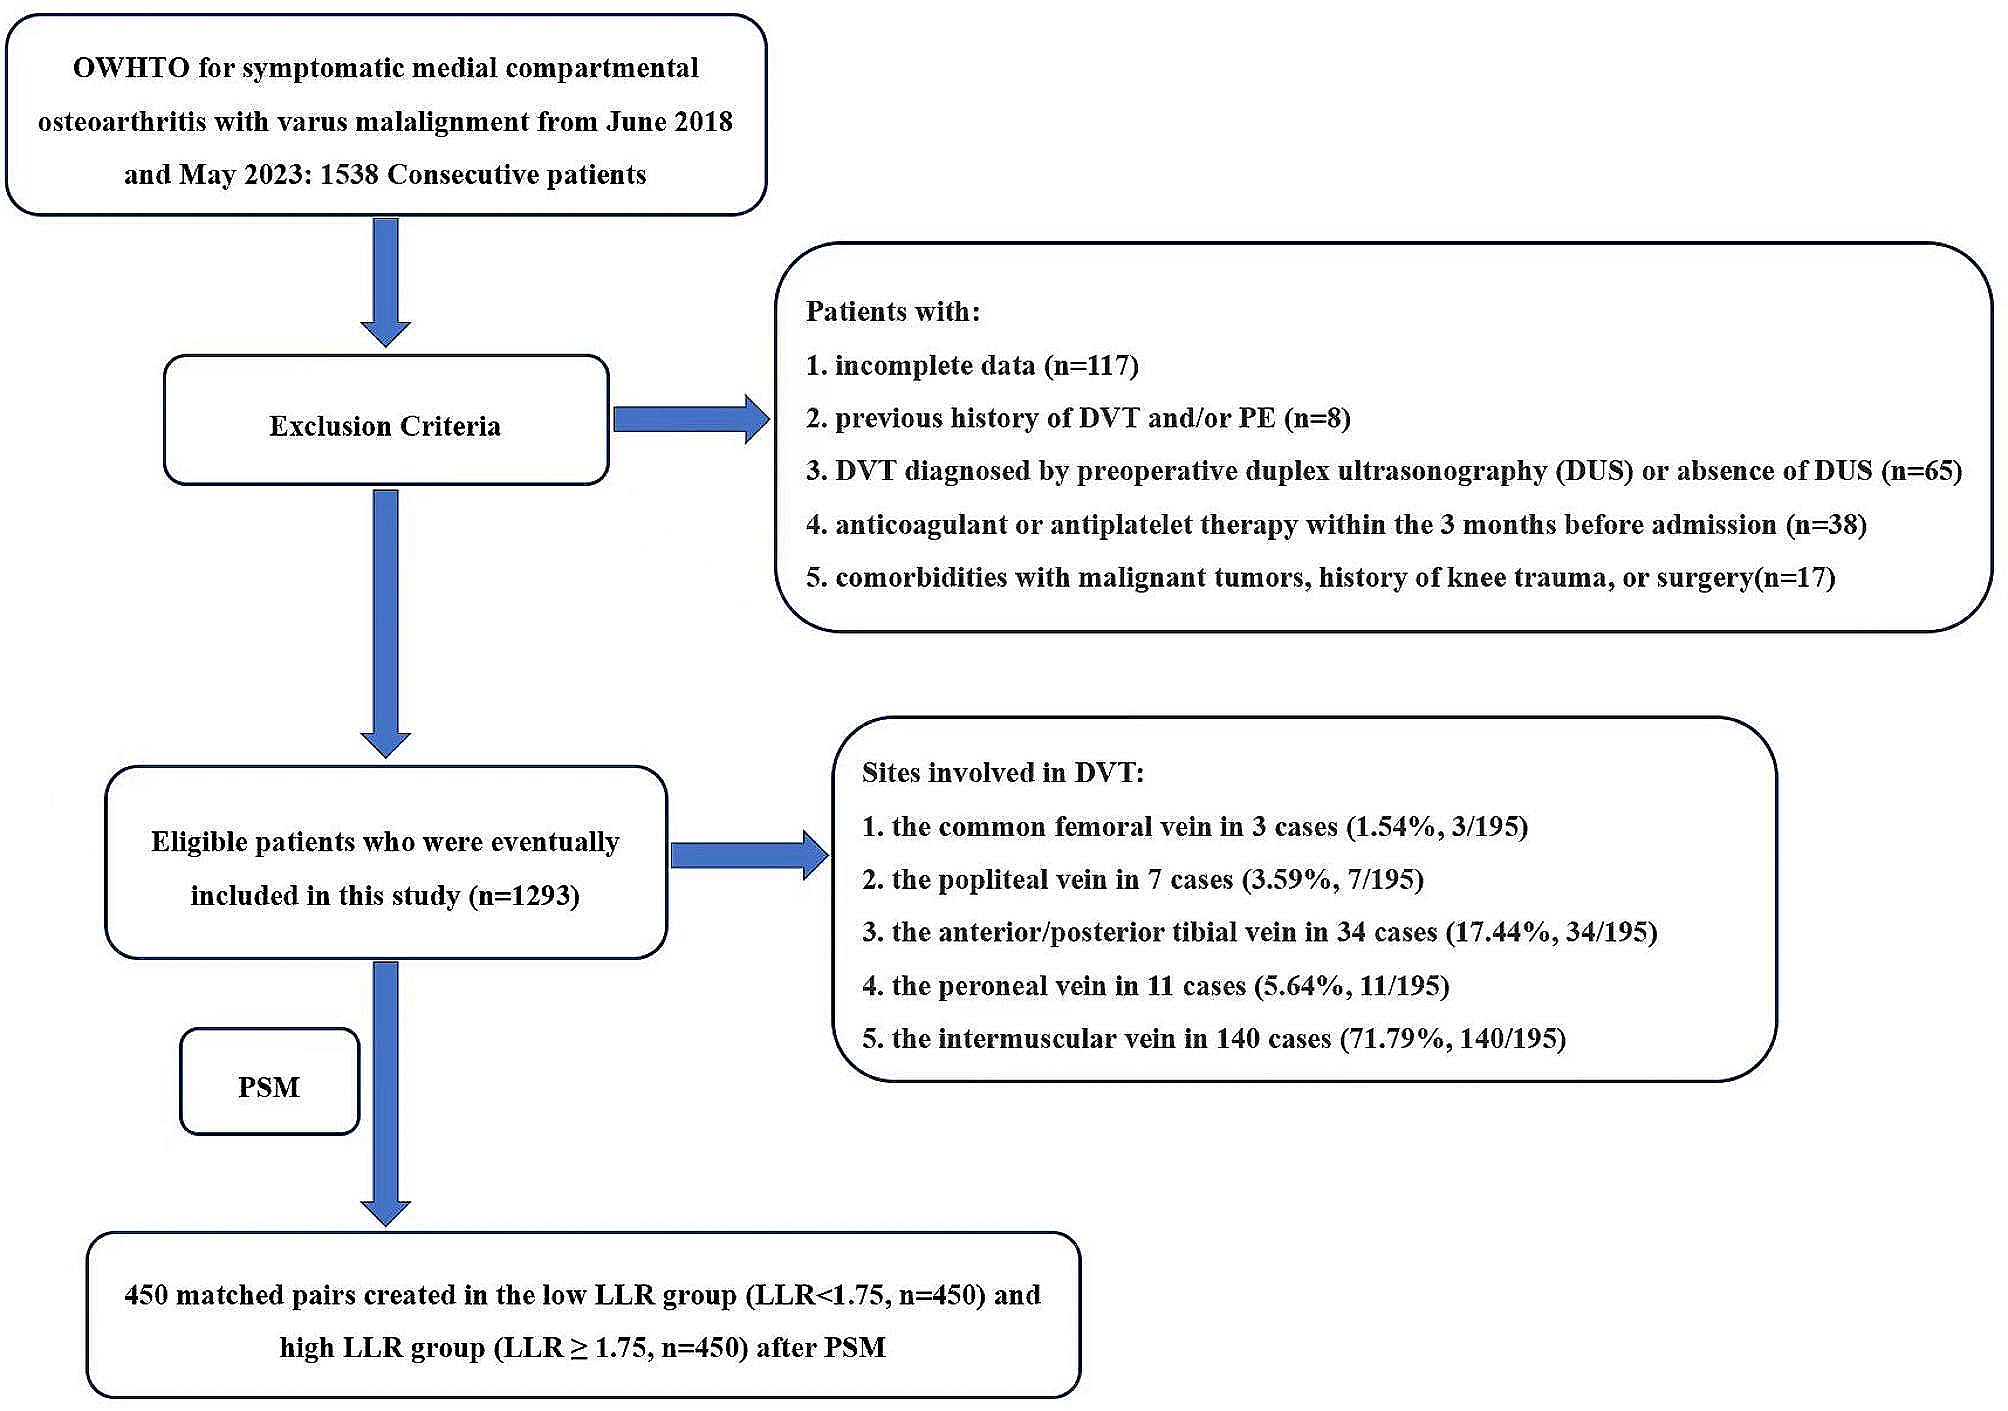 Low-density lipoprotein cholesterol-to-lymphocyte count ratio (LLR) is a promising novel predictor of postoperative new-onset deep vein thrombosis following open wedge high tibial osteotomy: a propensity score-matched analysis